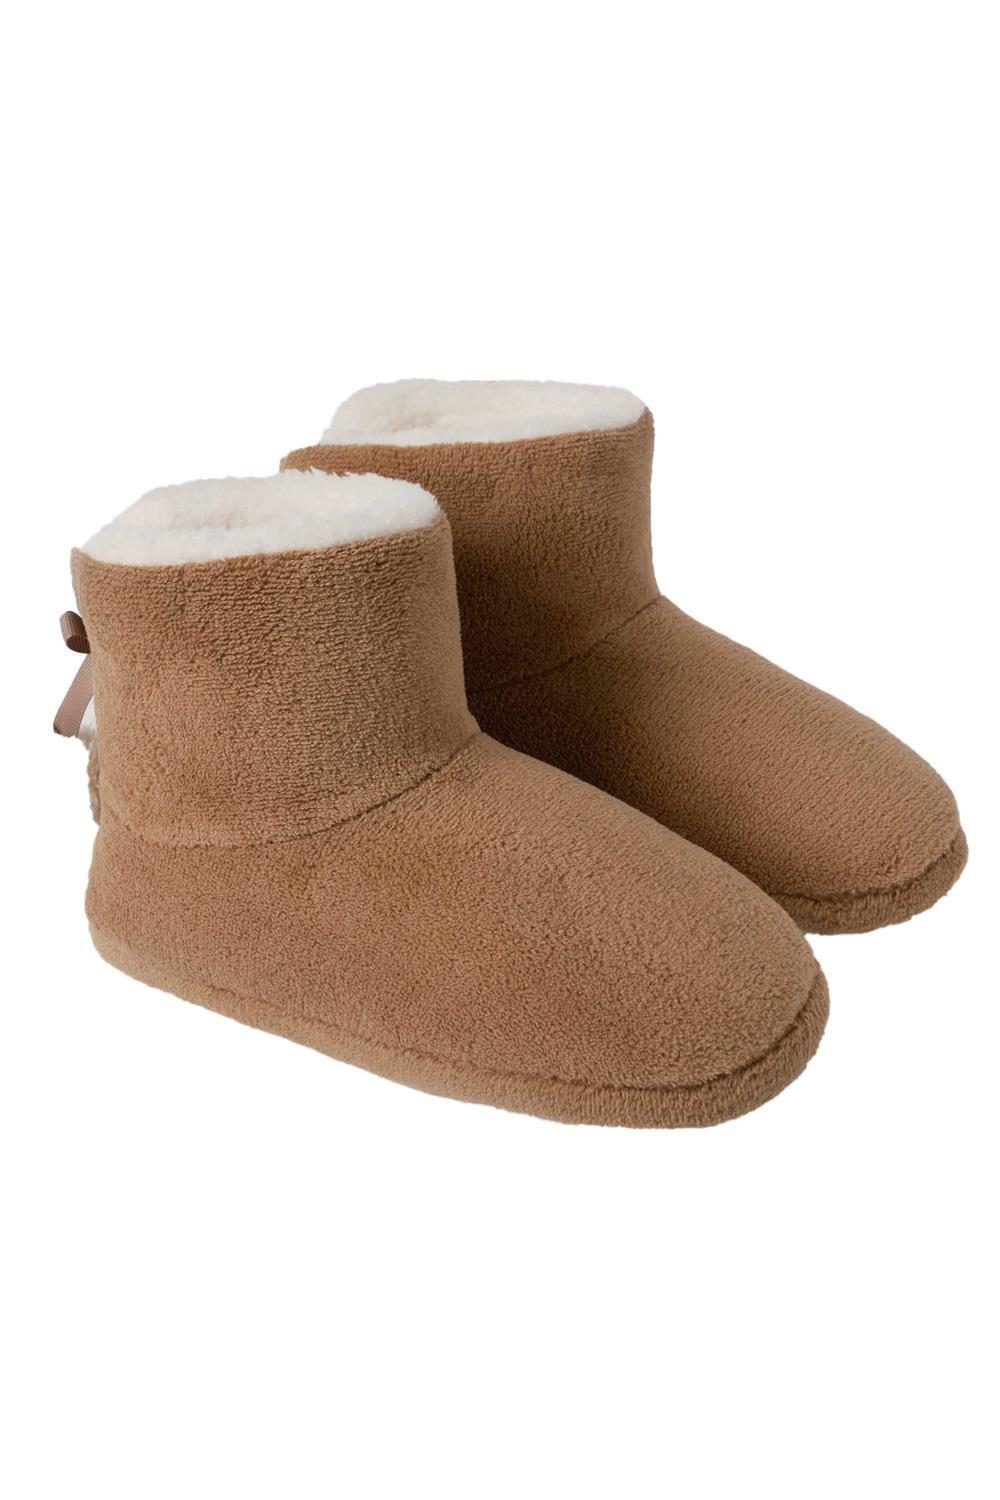 Faux Suede Sherpa Ankle Slipper Boots